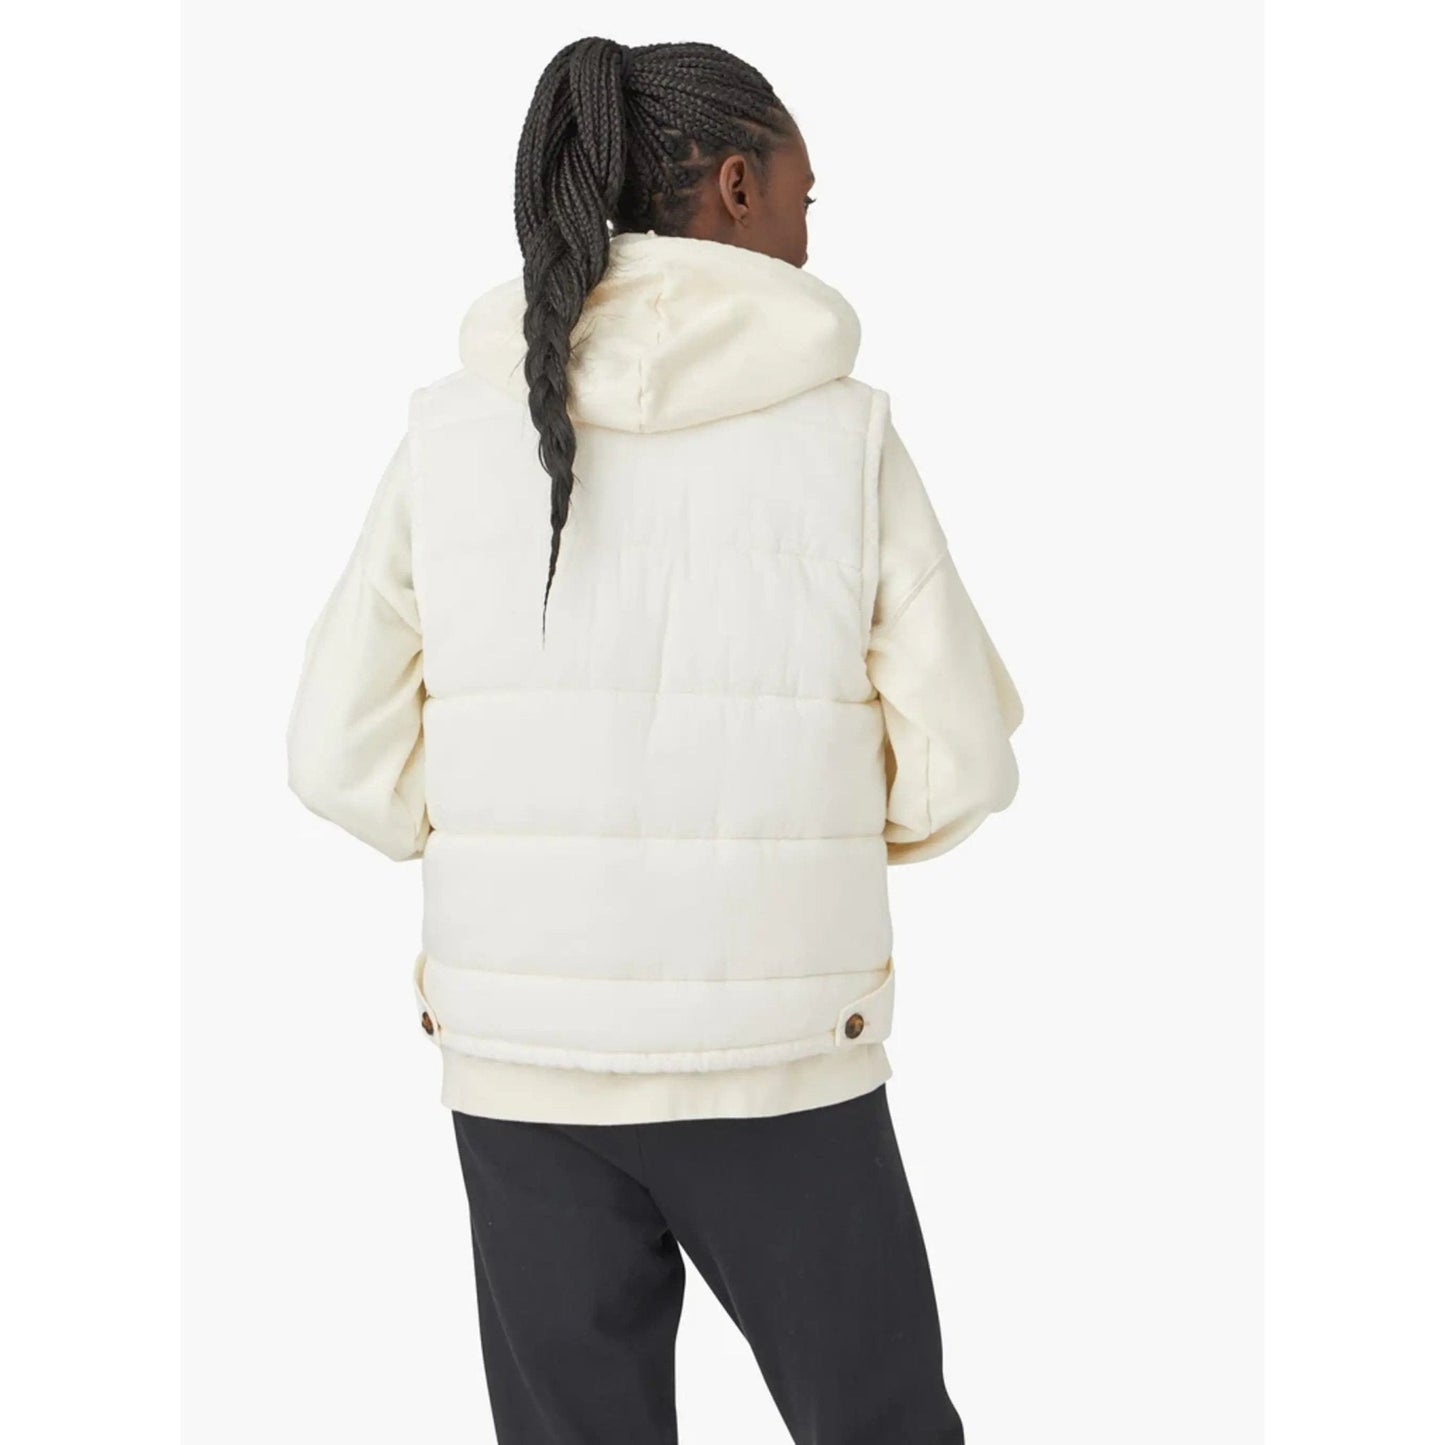 Load image into Gallery viewer, Hunter Puffer Vest - babette.shop
